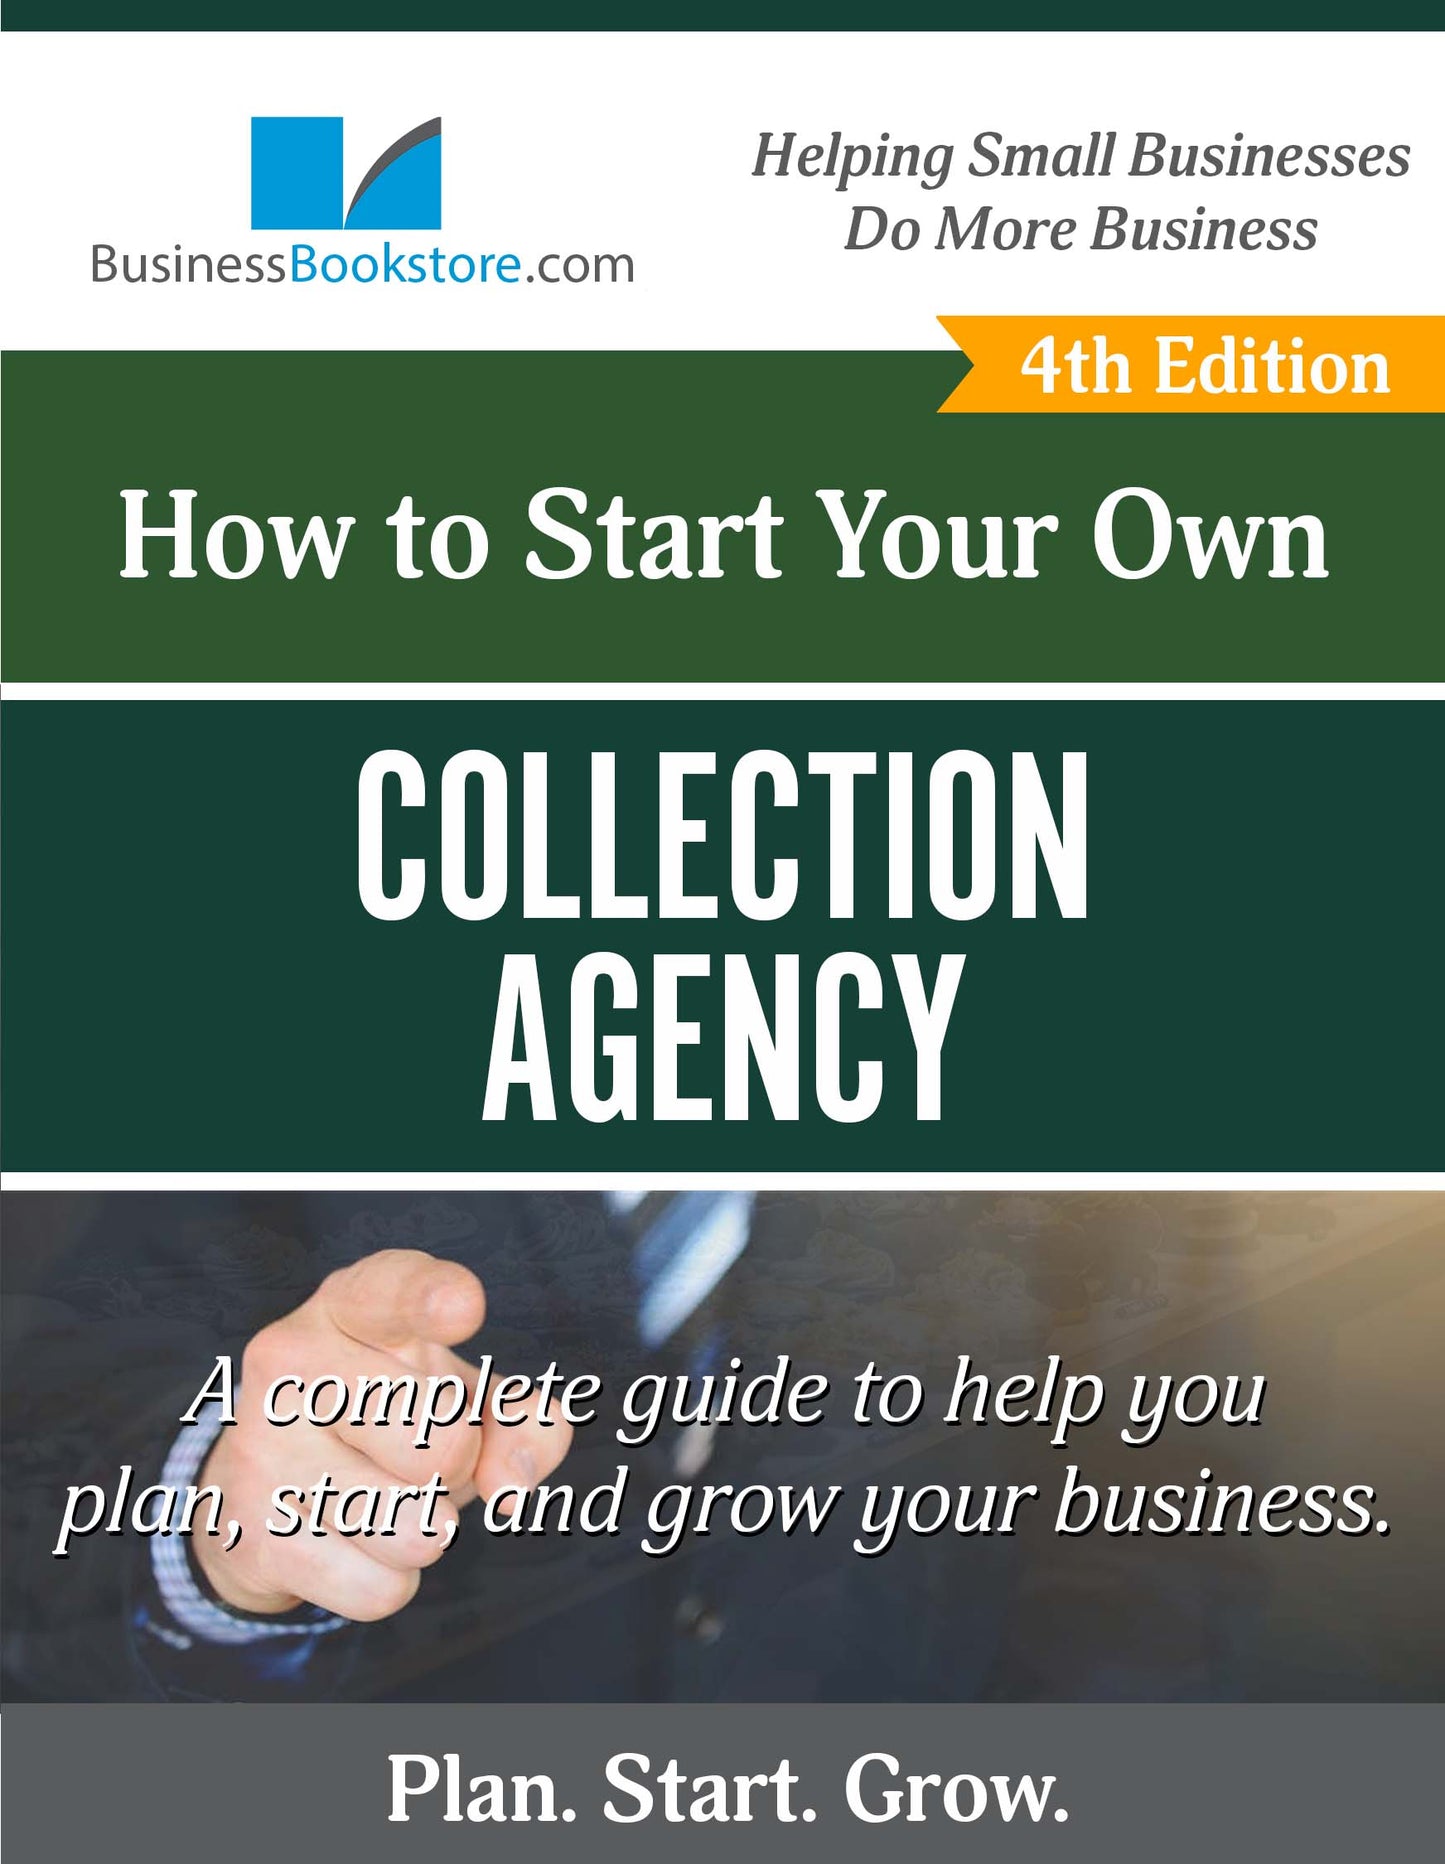 How to Start a Collection Agency